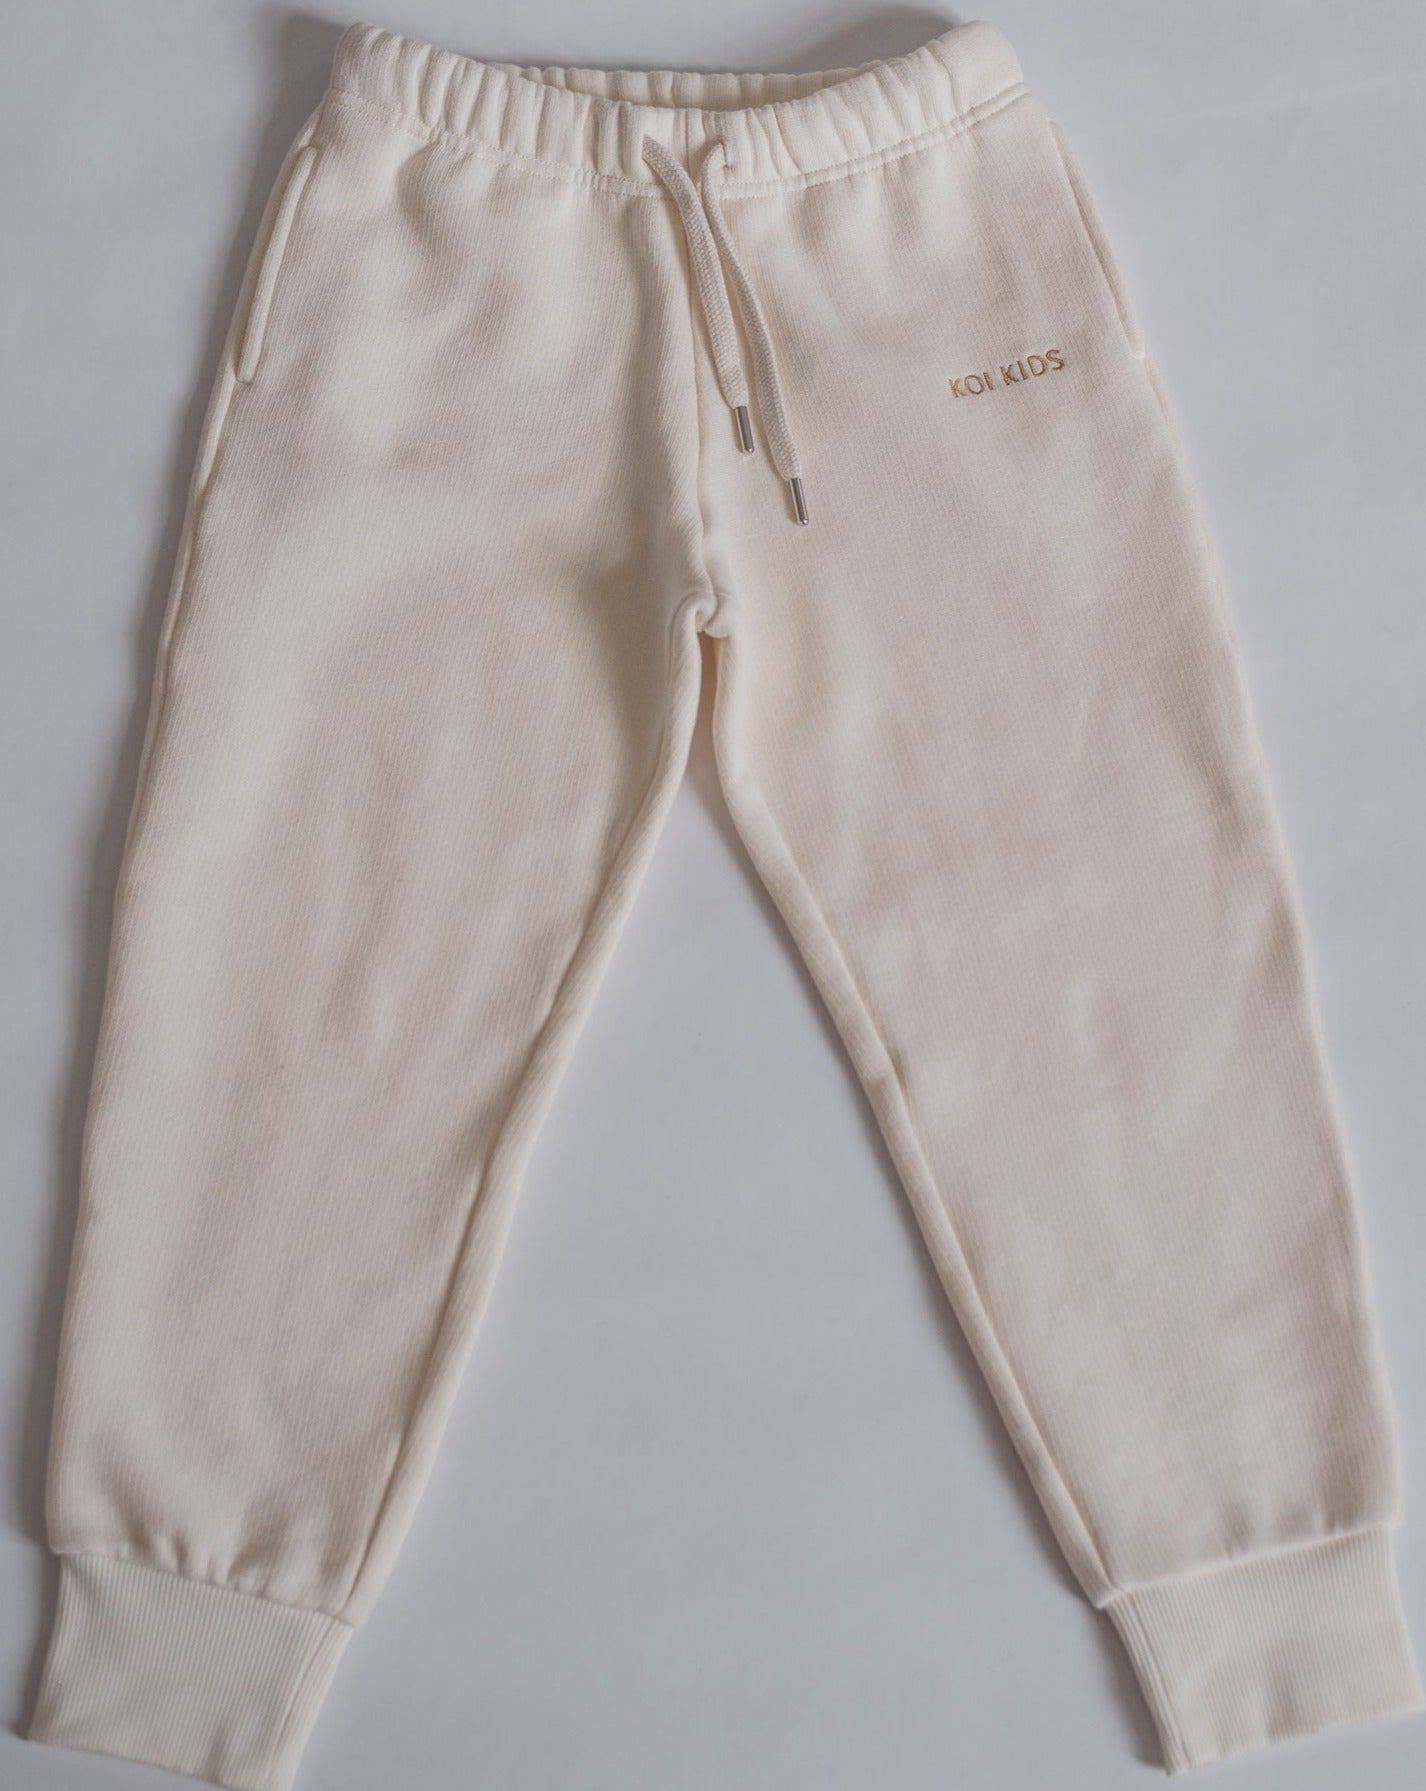 Offwhite sweatpants with a drawstring elasticated waist, light brown logo embroidery, side pockets and ribbed cuffs.